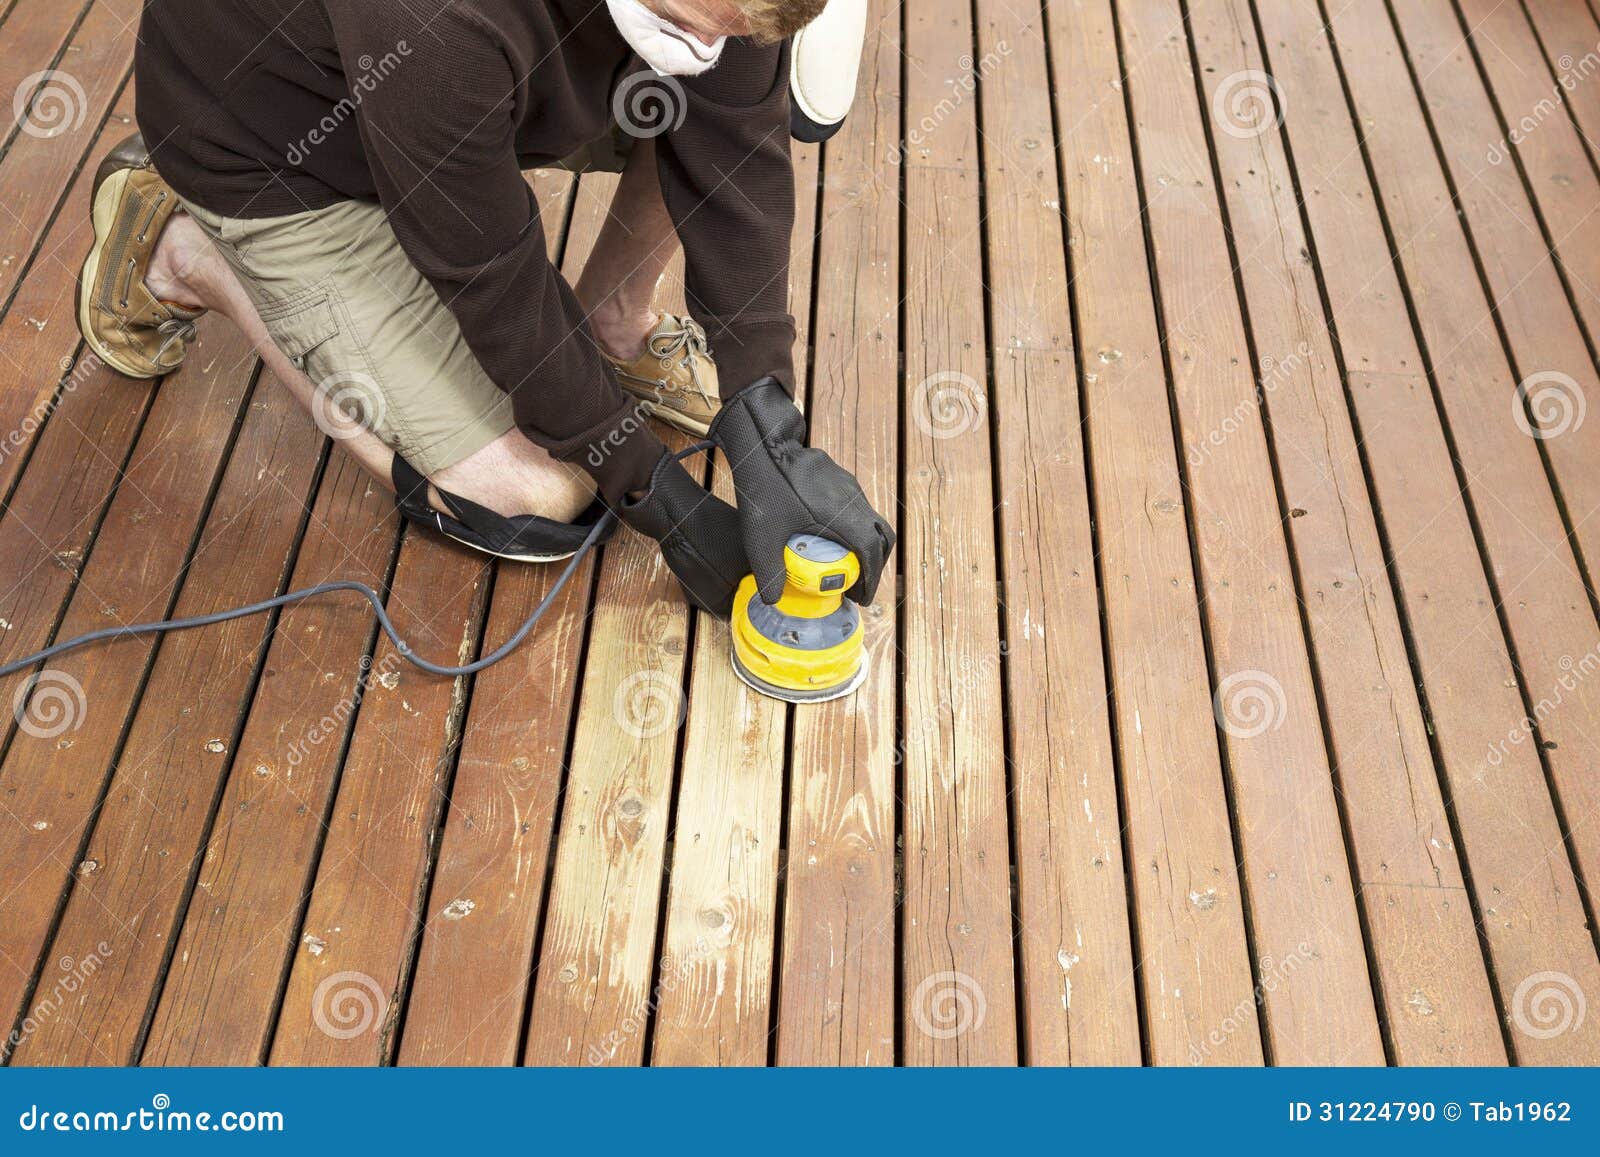 mature man performing maintenance on home wooden deck